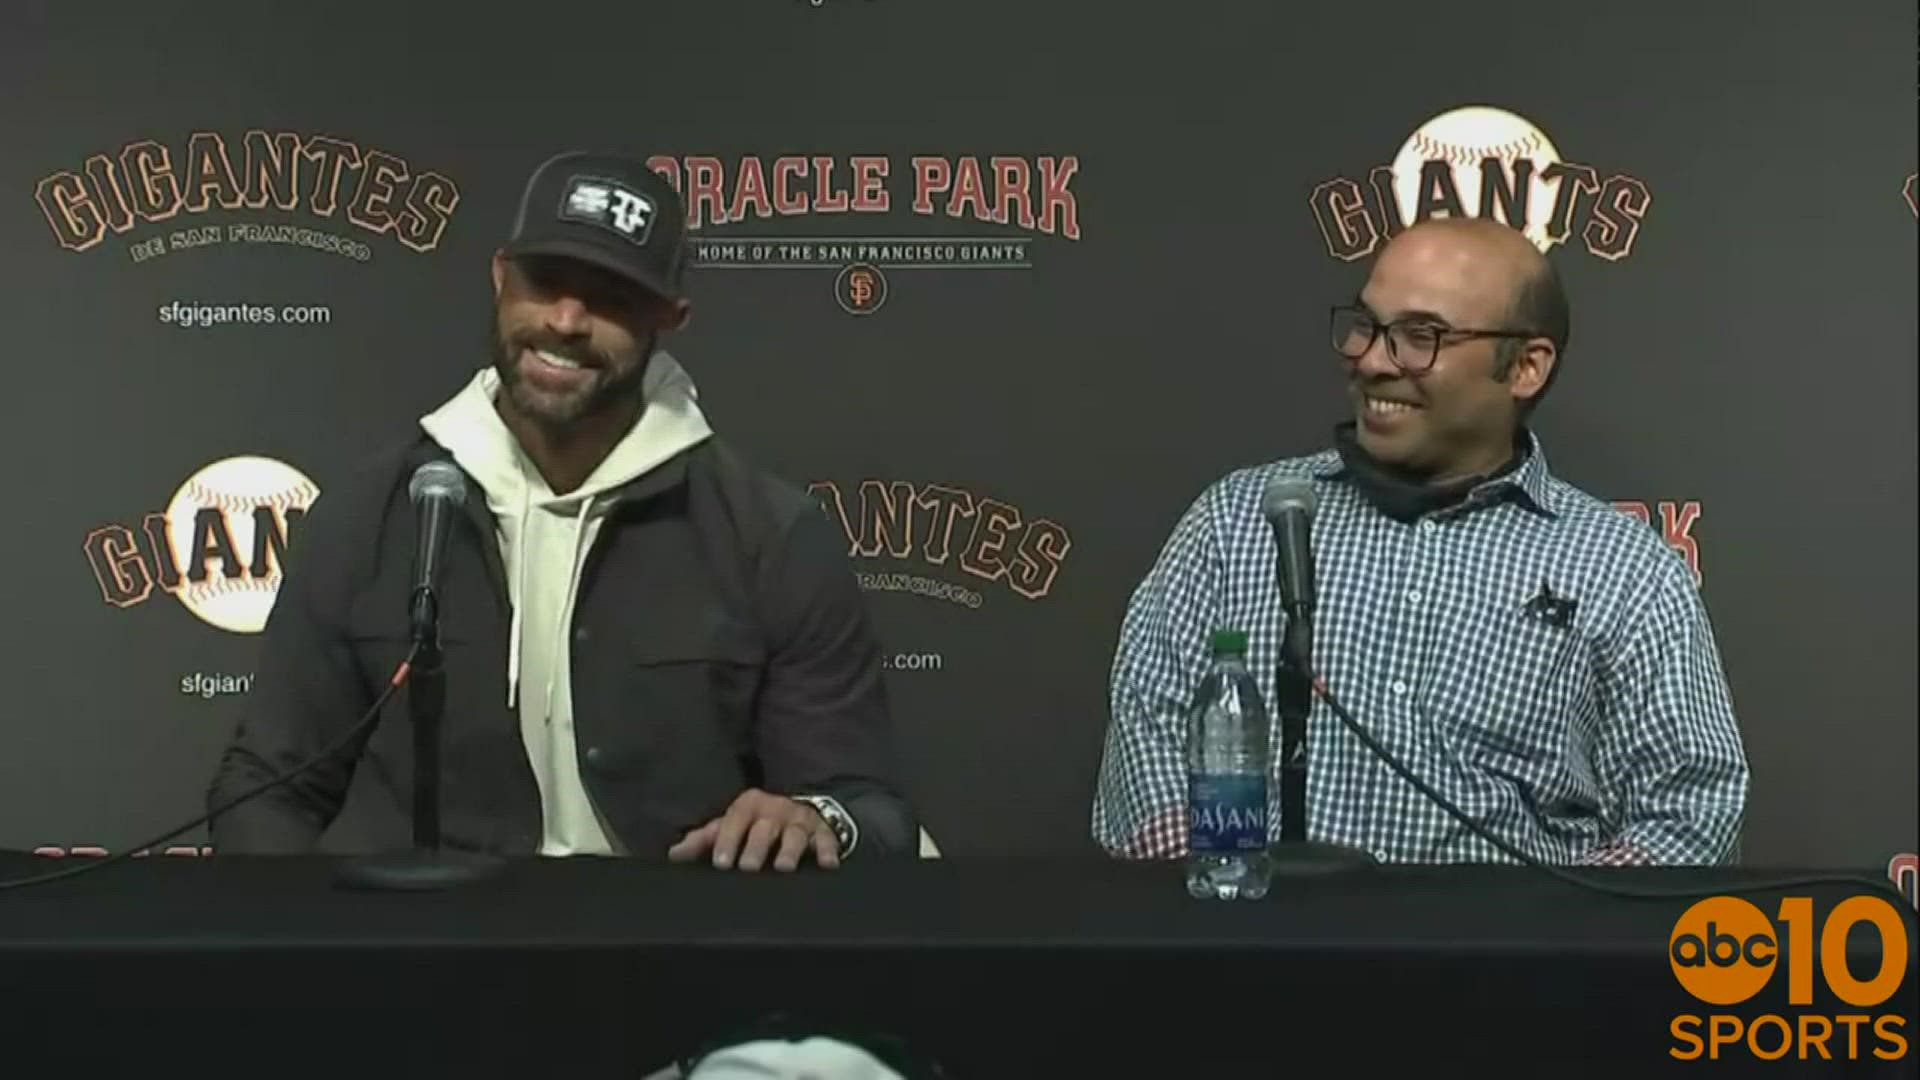 In the end of season press conference, San Francisco Giants GM Farhan Zaidi & manager Gabe Kapler meet with the media to discuss the priorities for the offseason.